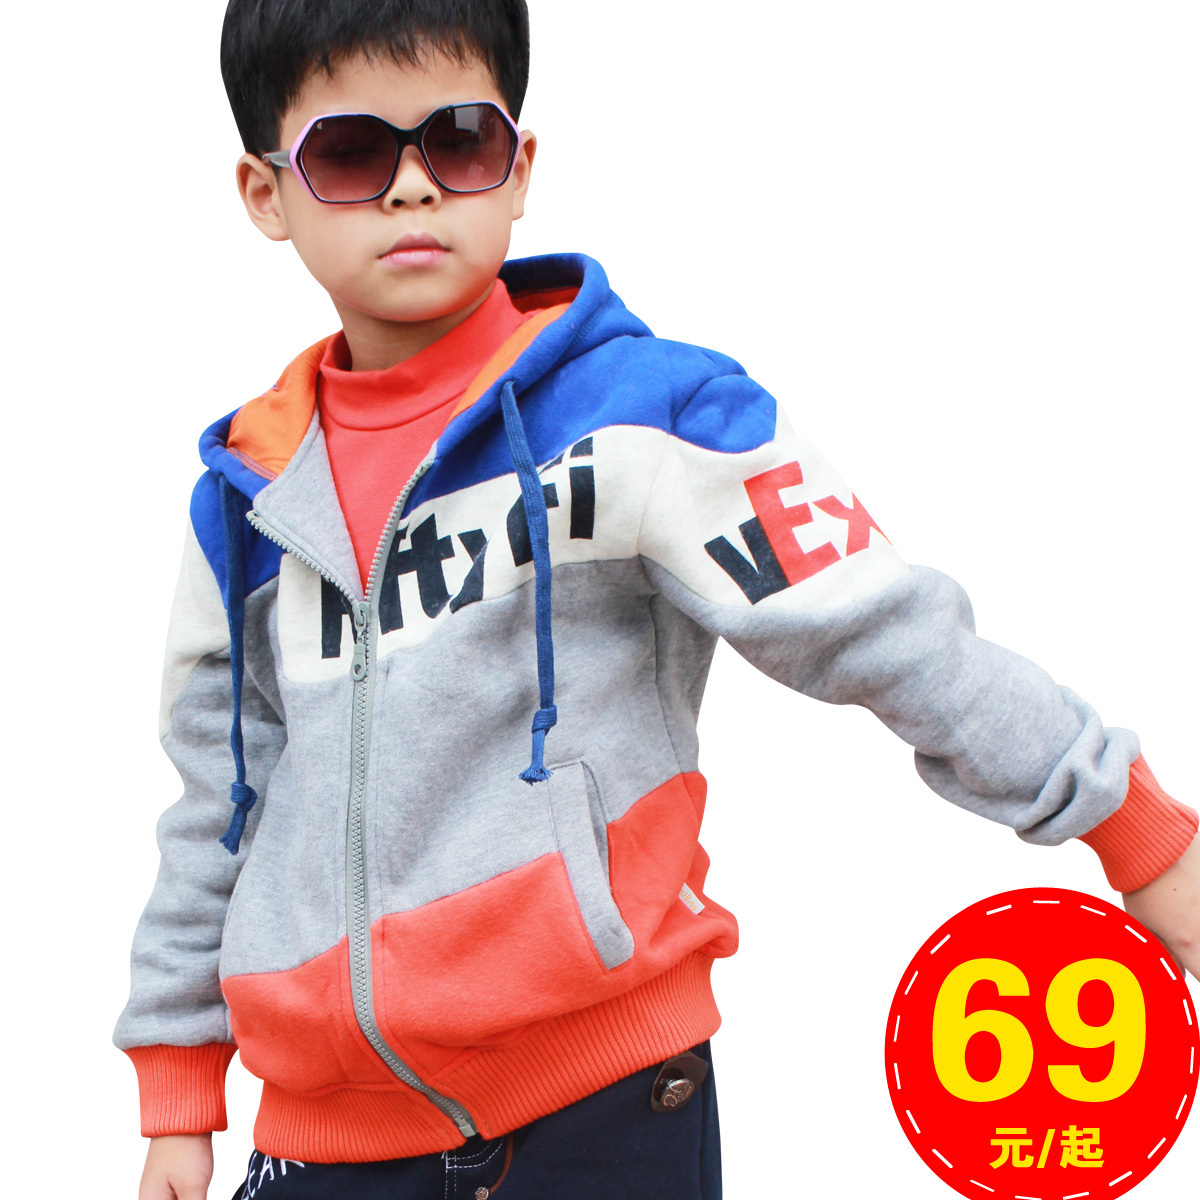 2012 male girls clothing child autumn and winter thermal sweatshirt hooded inner fleece thickening outerwear long-sleeve